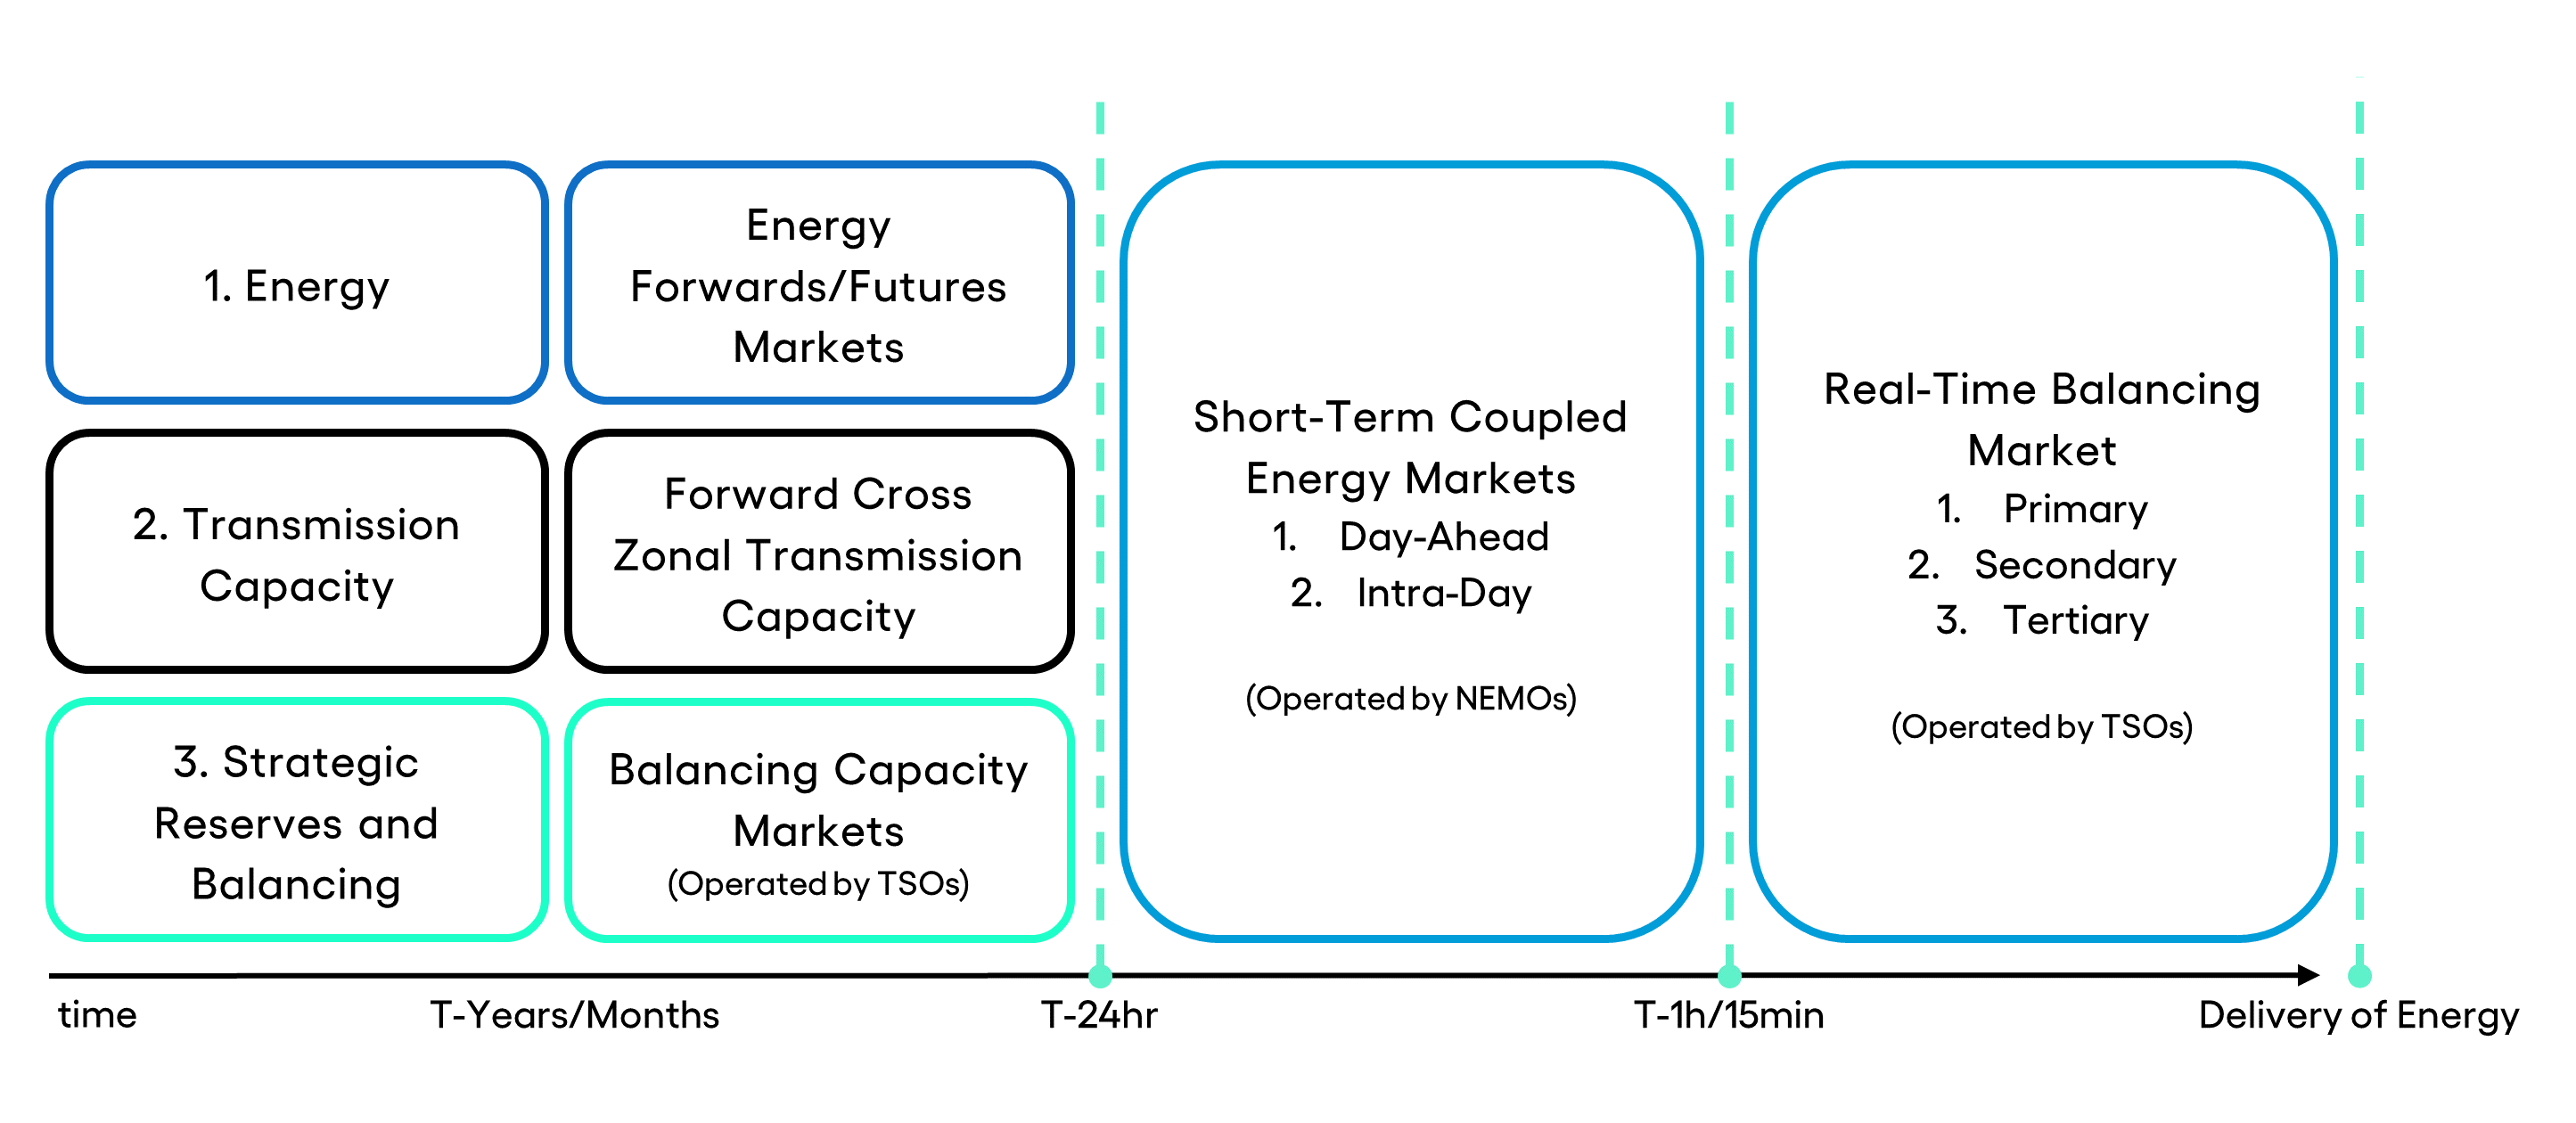 Different components of the electricity market by delivery time